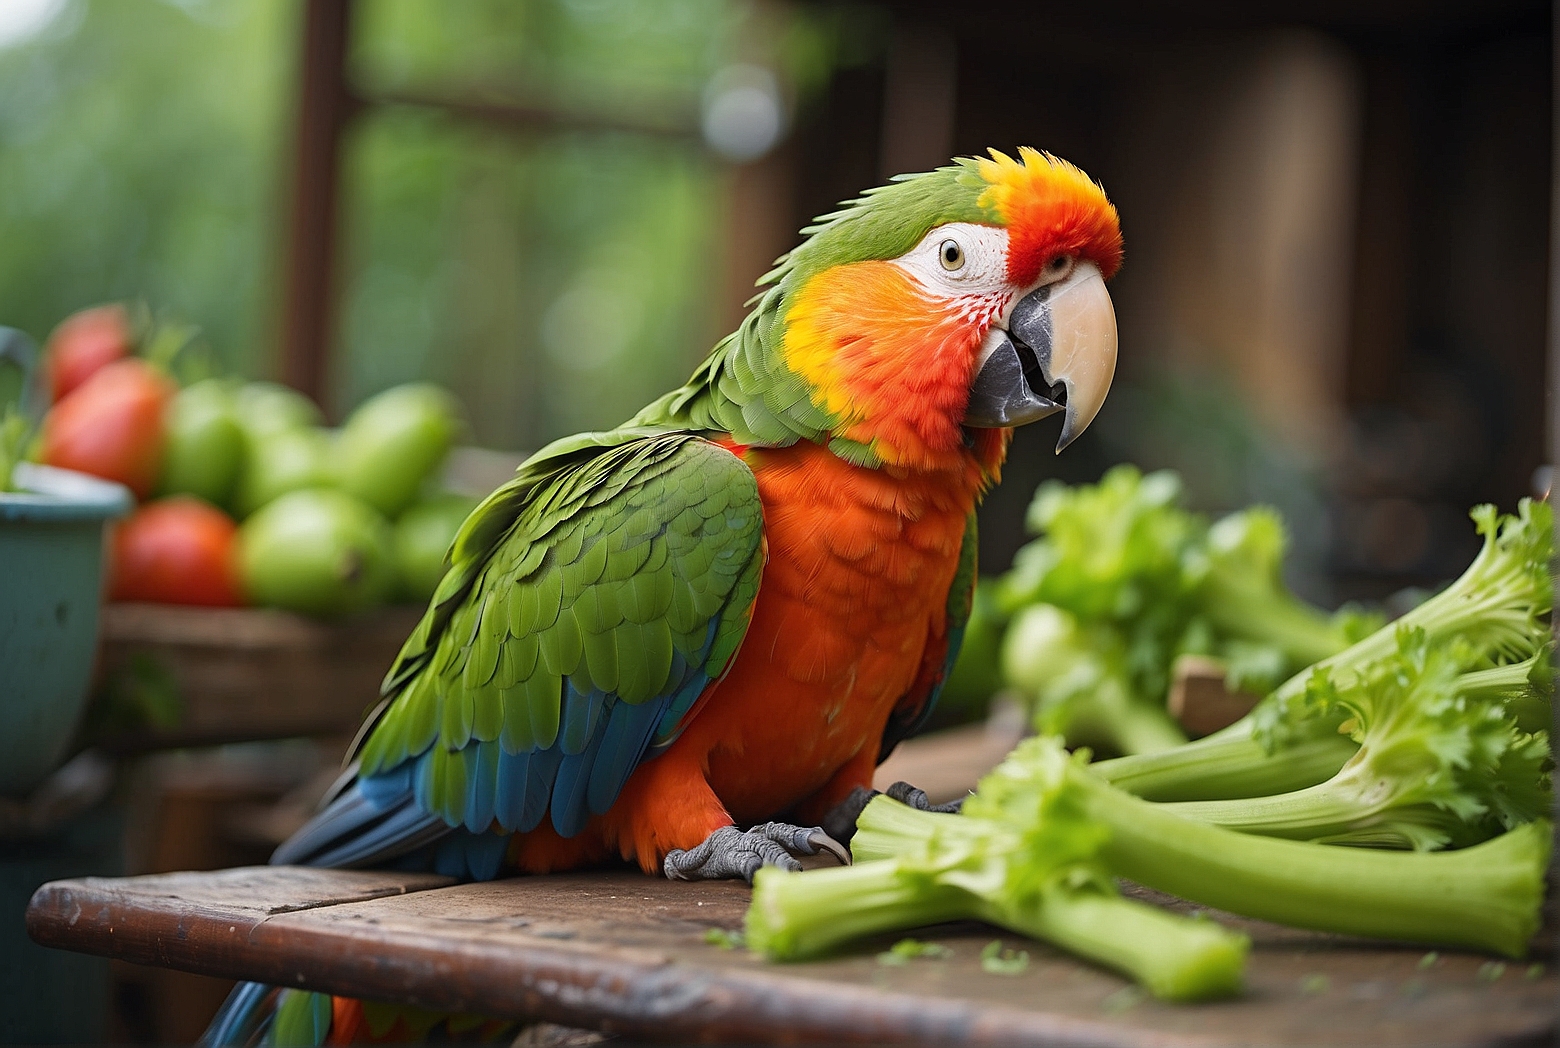 Can Parrots Eat Celery as a Snack?